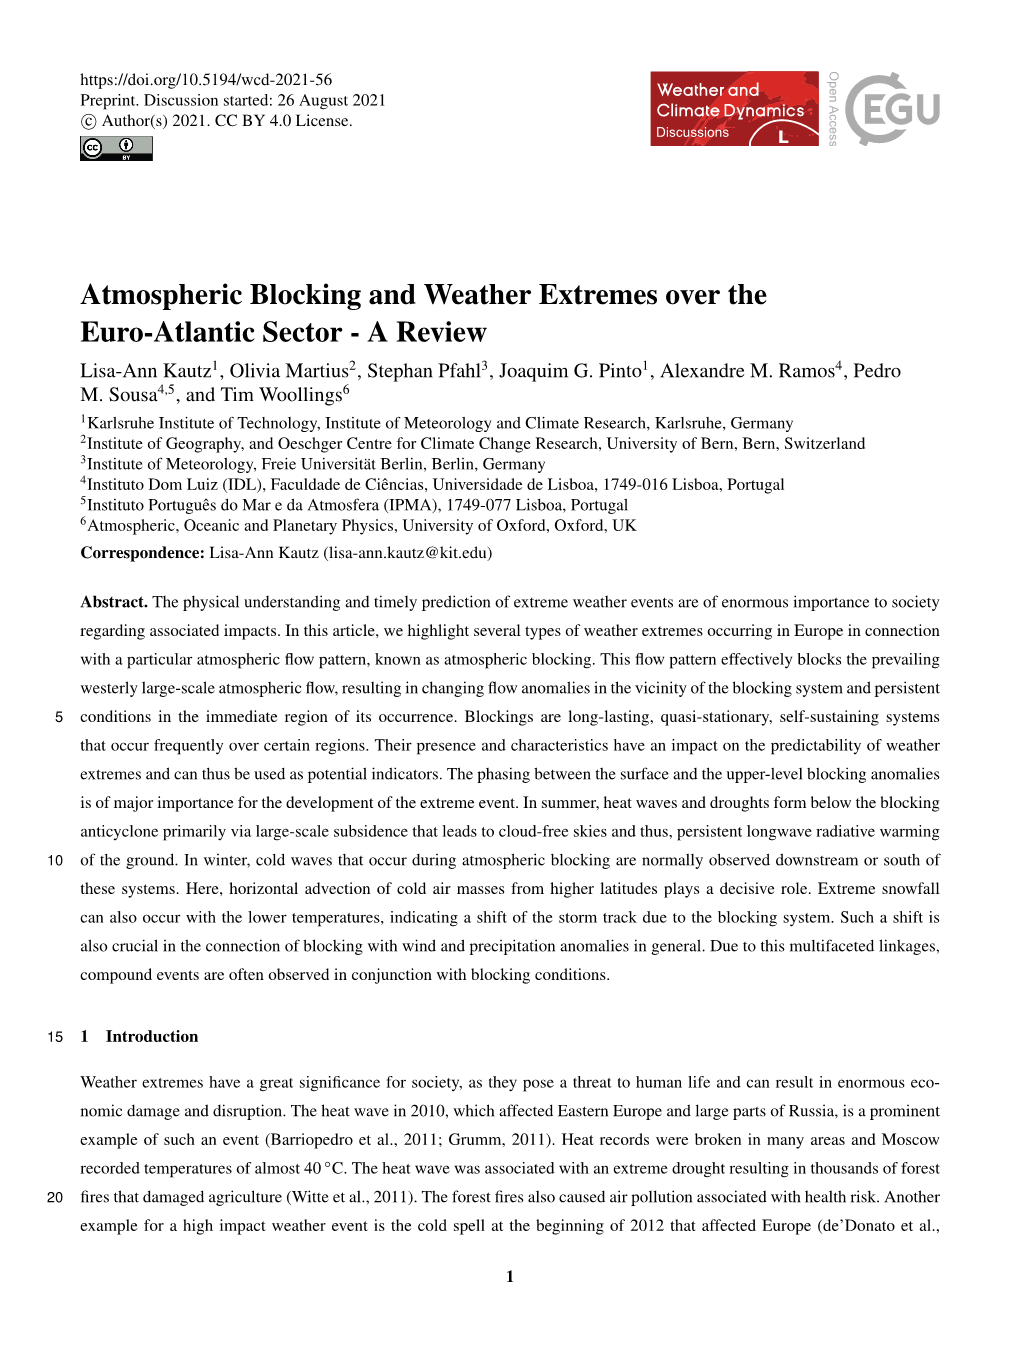 Atmospheric Blocking and Weather Extremes Over the Euro-Atlantic Sector - a Review Lisa-Ann Kautz1, Olivia Martius2, Stephan Pfahl3, Joaquim G